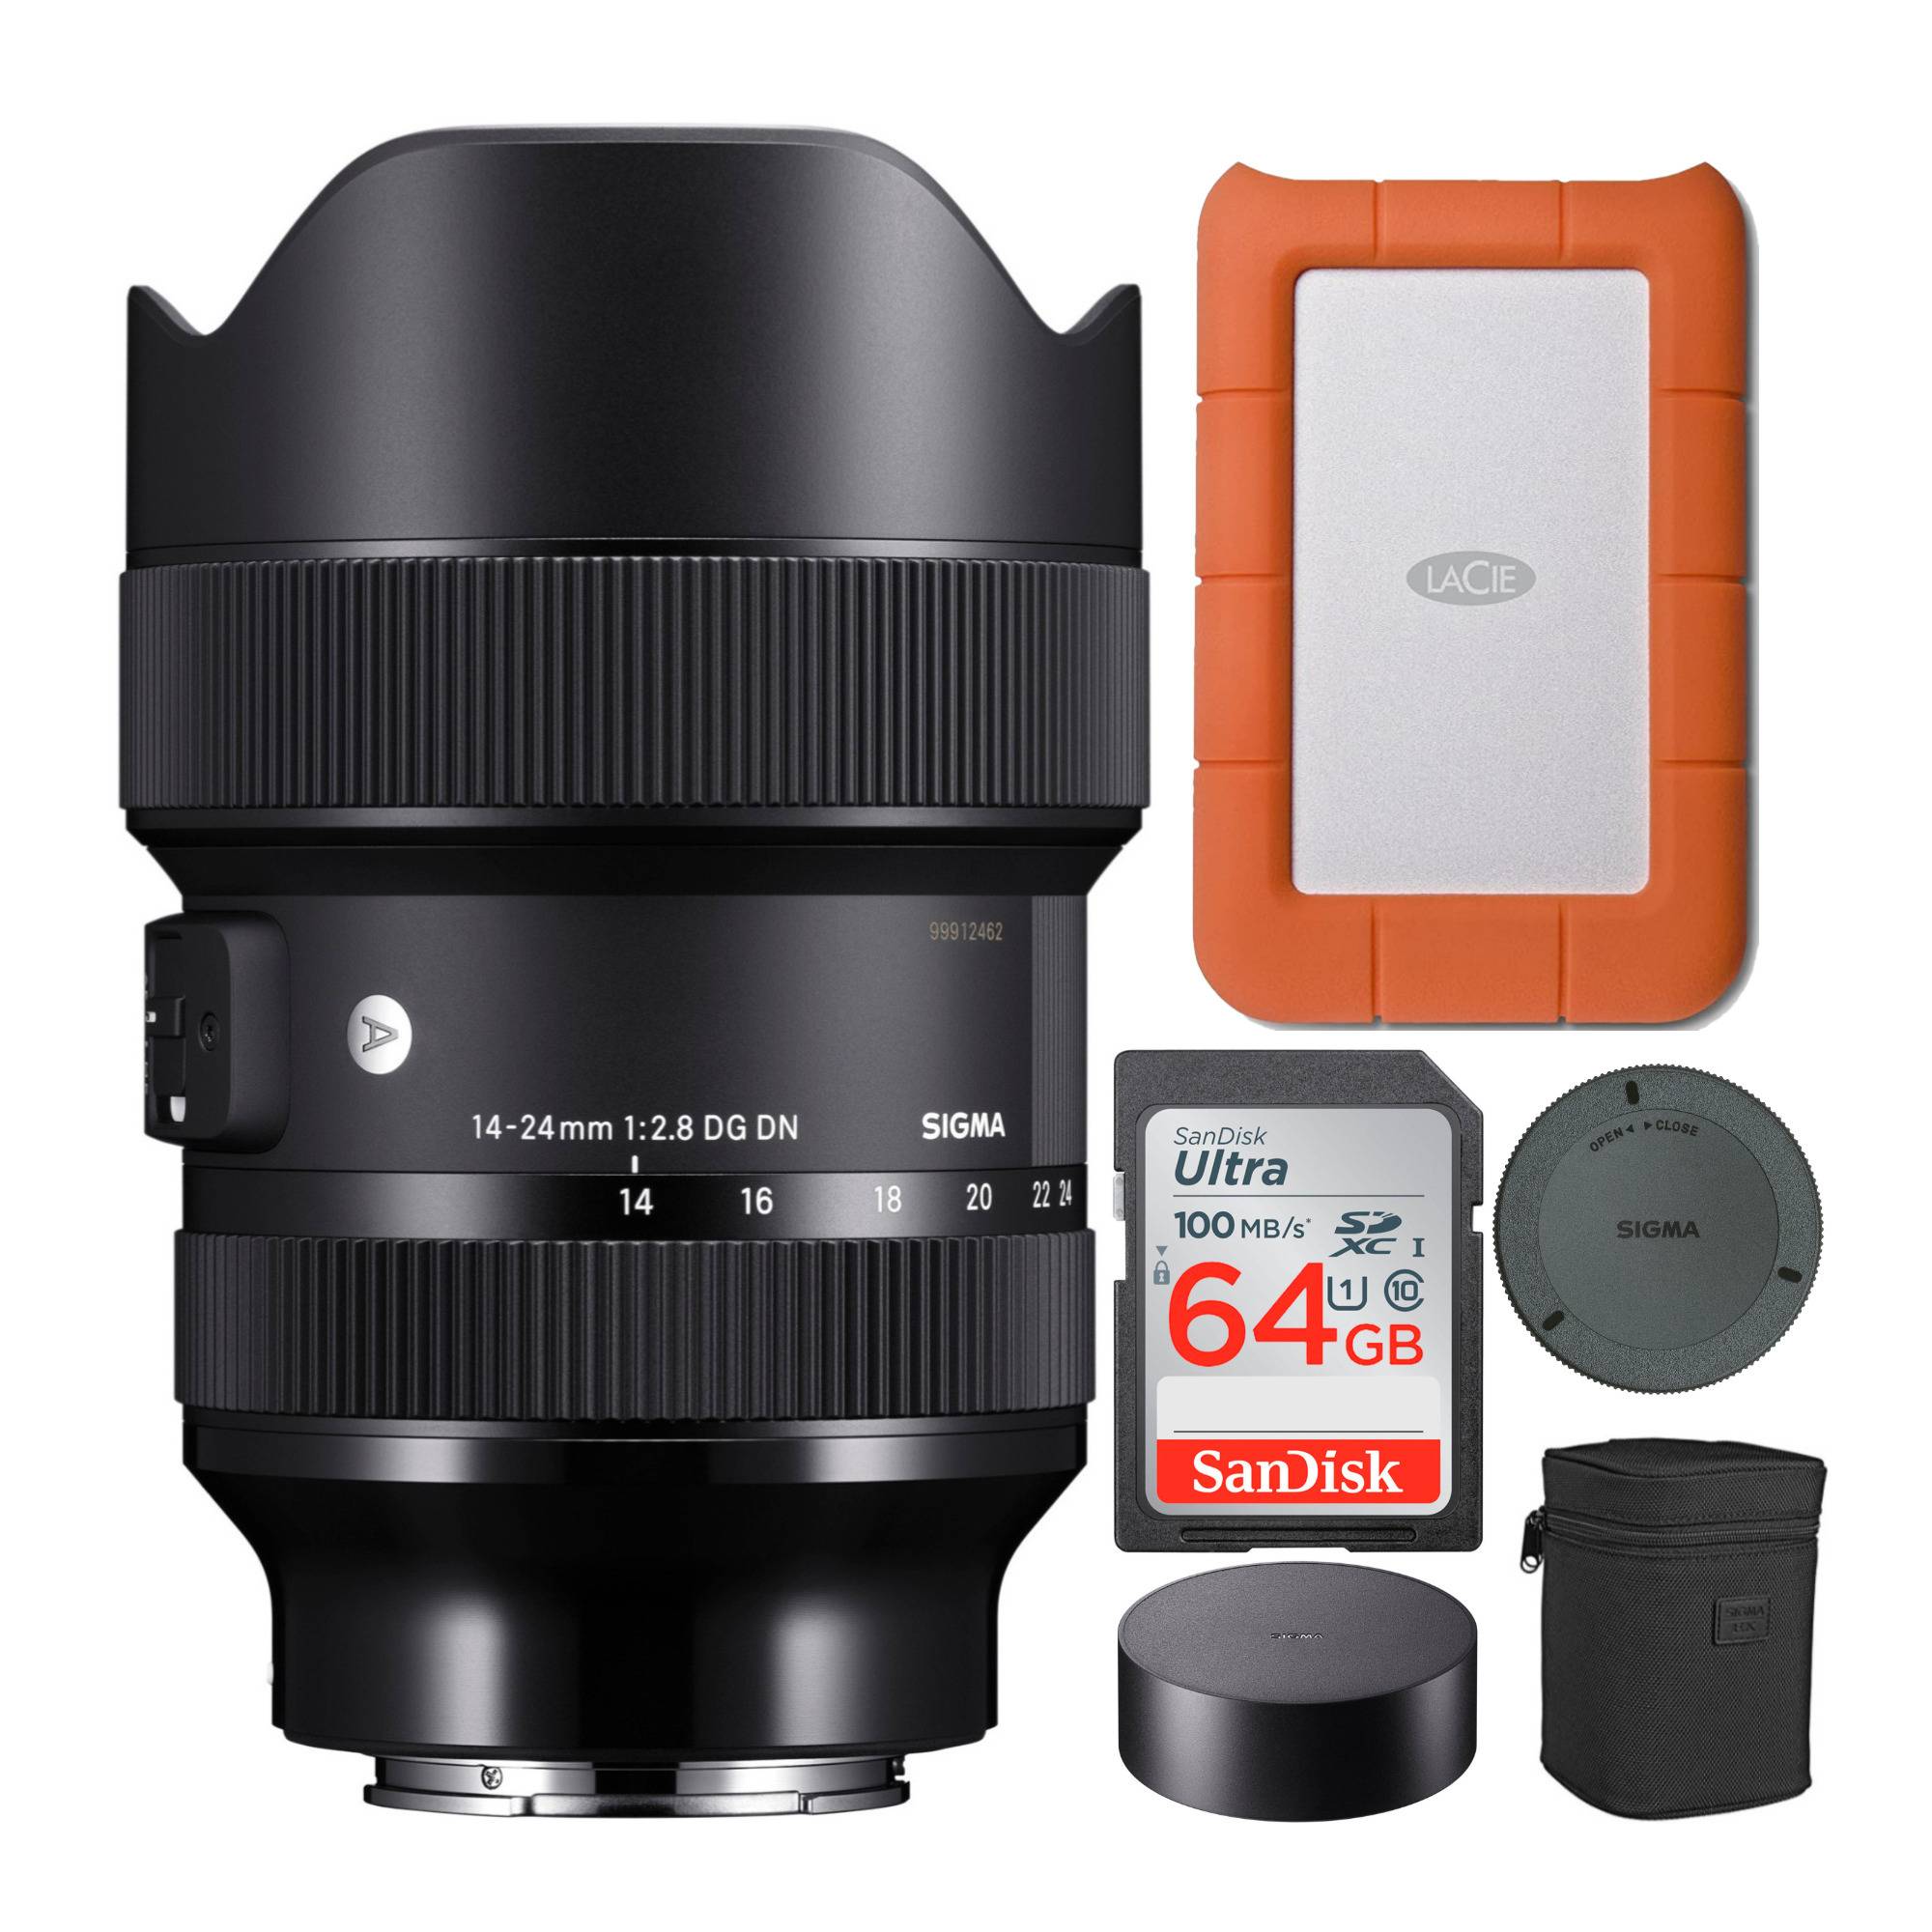 Sigma 14-24mm f/2.8 DG DN Art Lens for Sony E-Mount with 1TB Hard Drive and 64GB SD Card Bundle